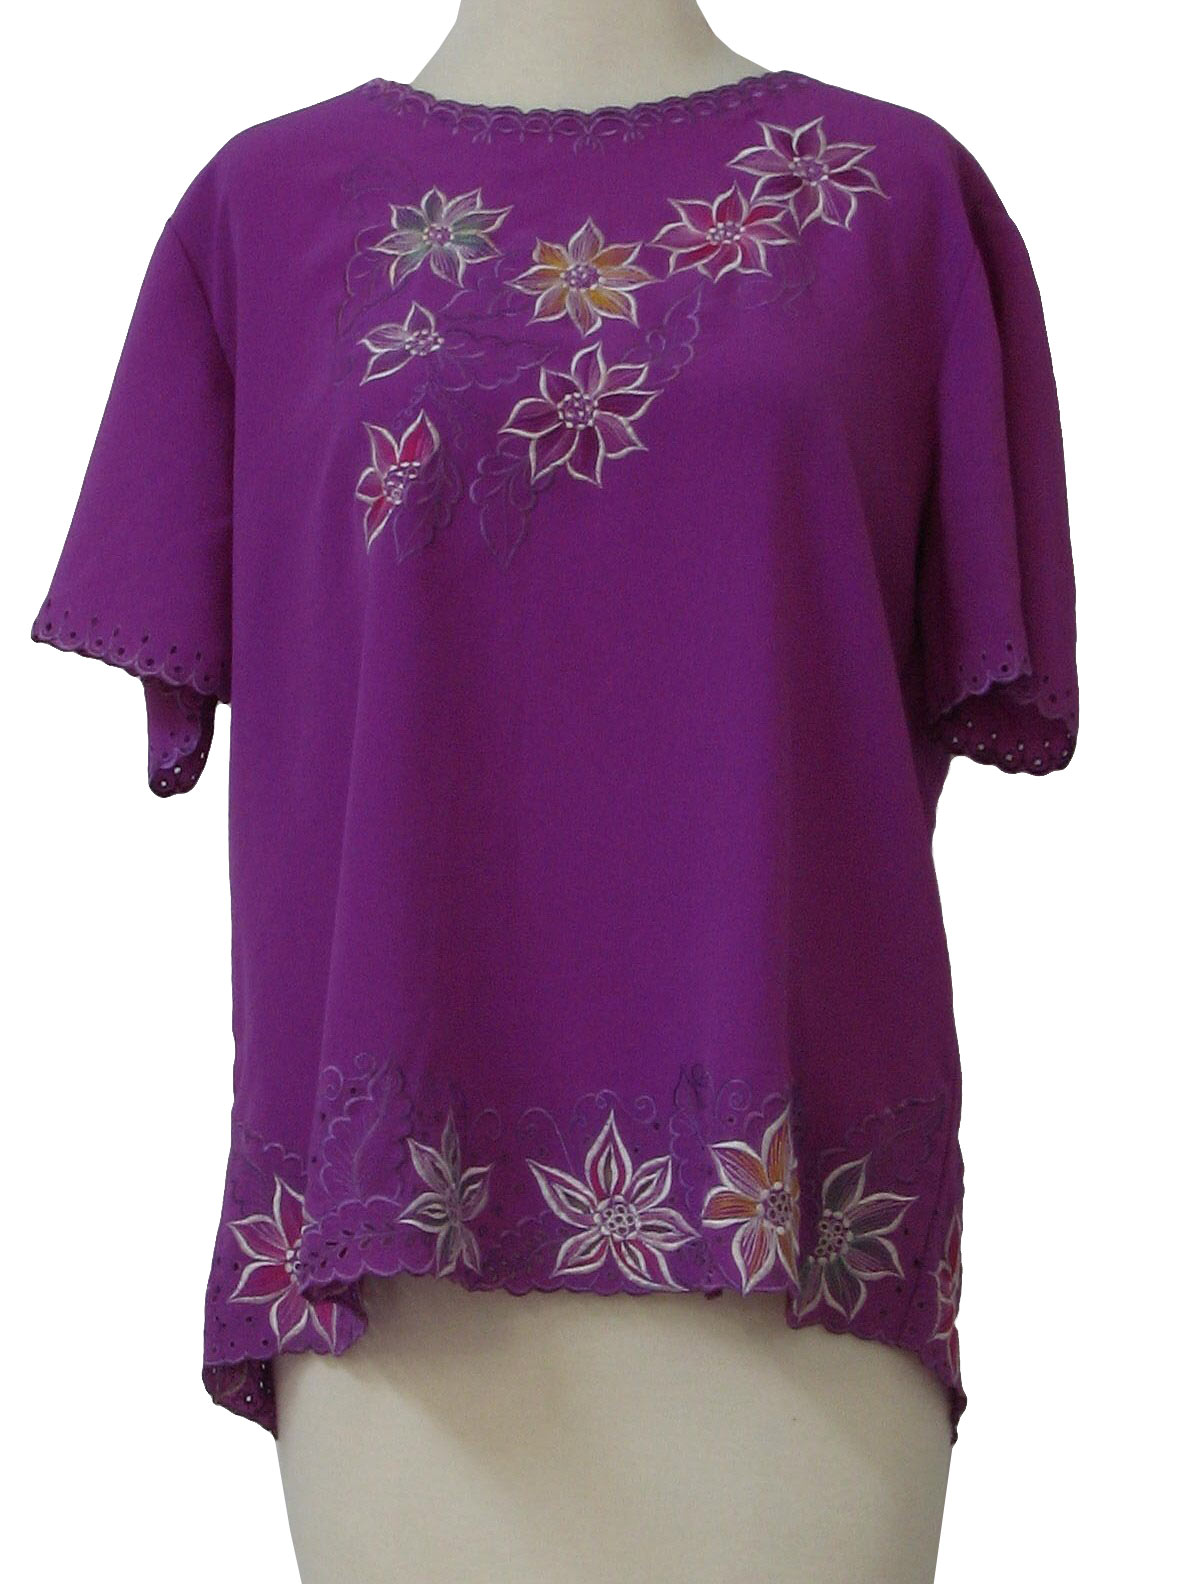 Vintage 1980's Hippie Shirt: 80s -no label- Womens orchid, silver, gold ...